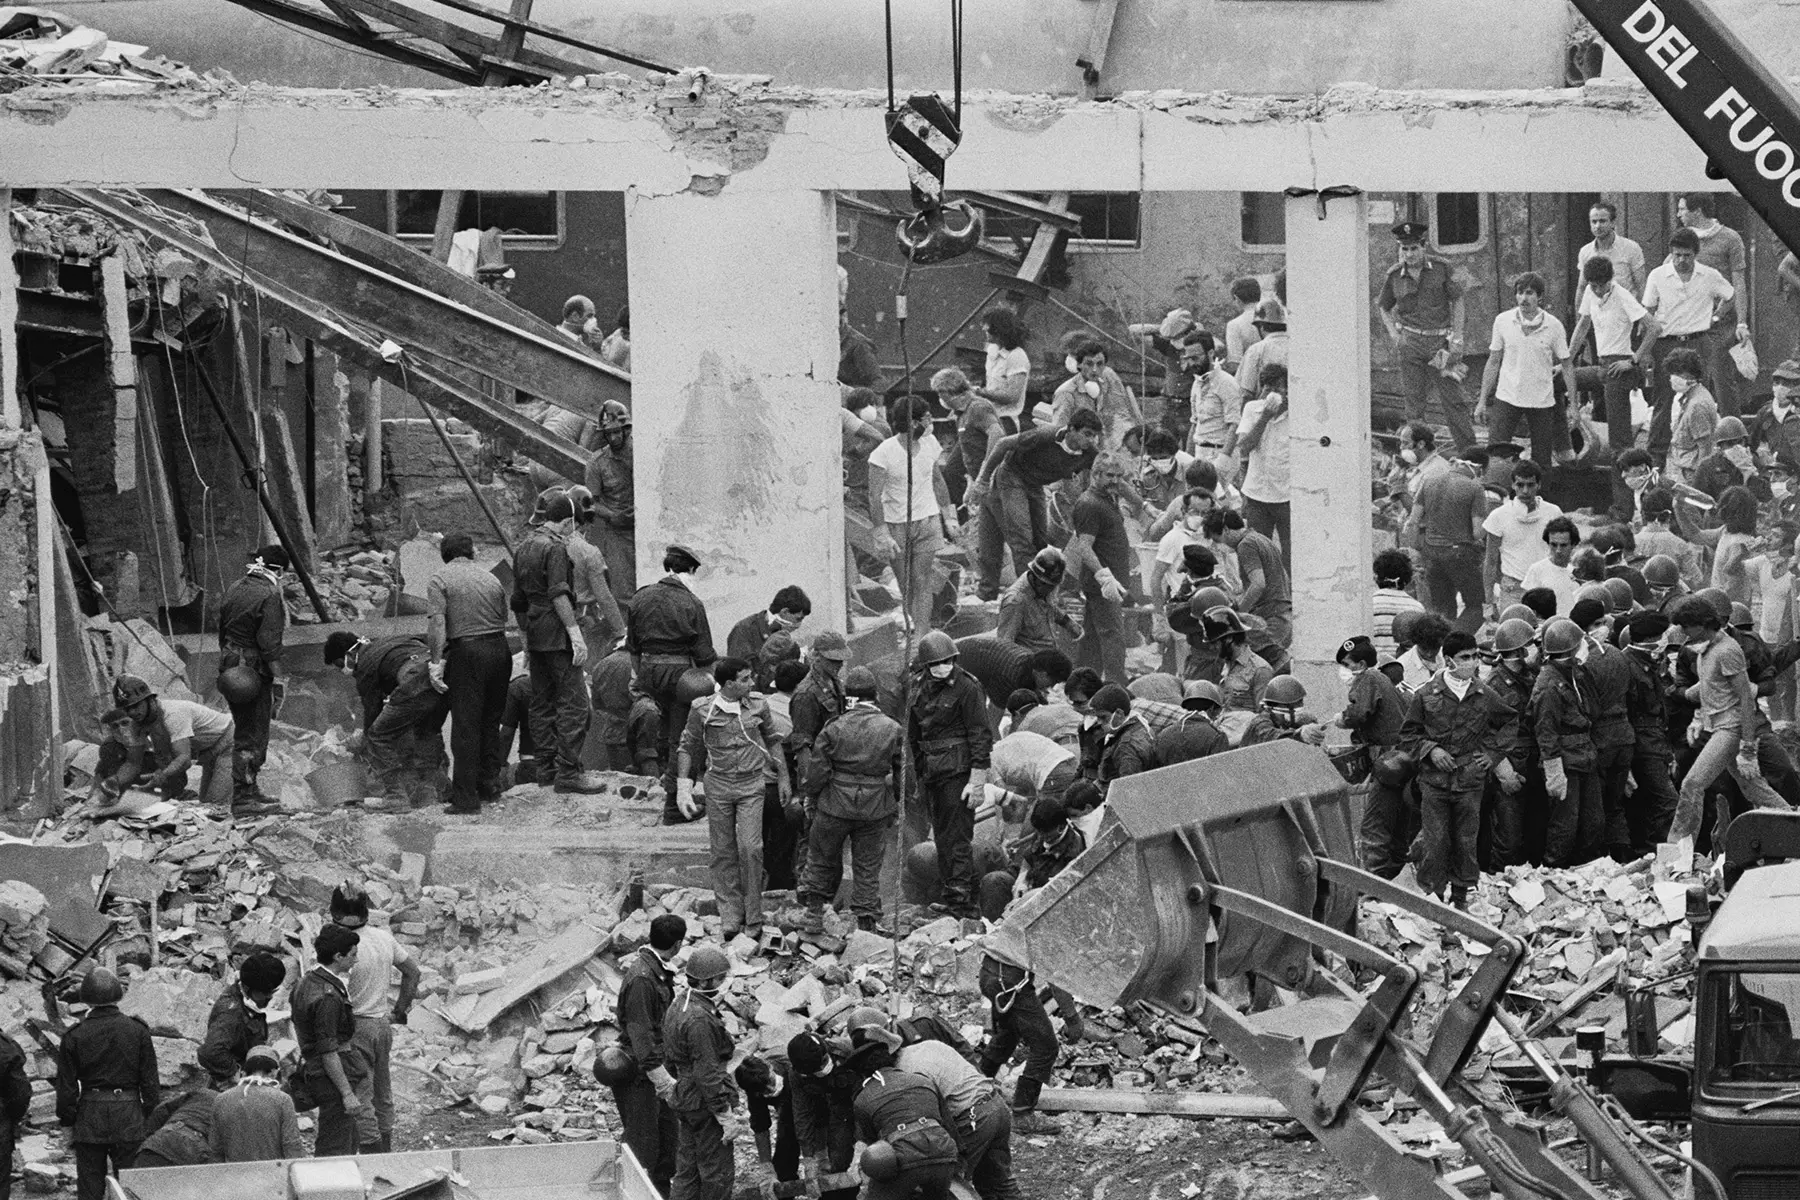 A bombing at Bologna Centrale railway station in August 1980 killed 85 people